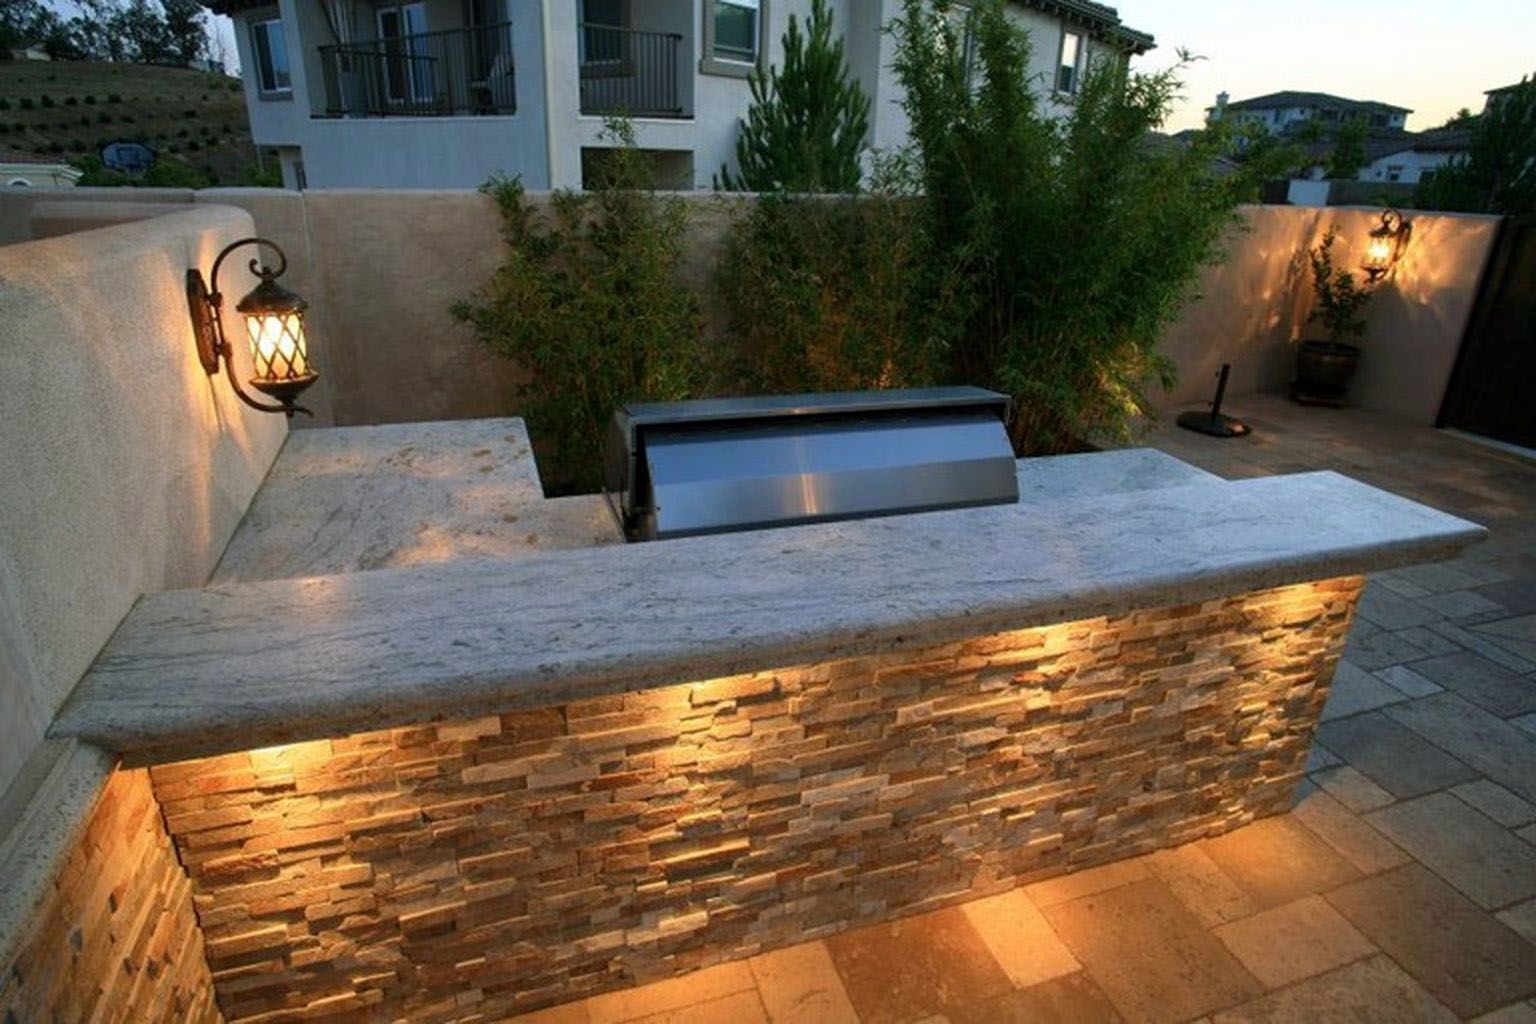 Benefits of Professionally Built Outdoor Kitchens